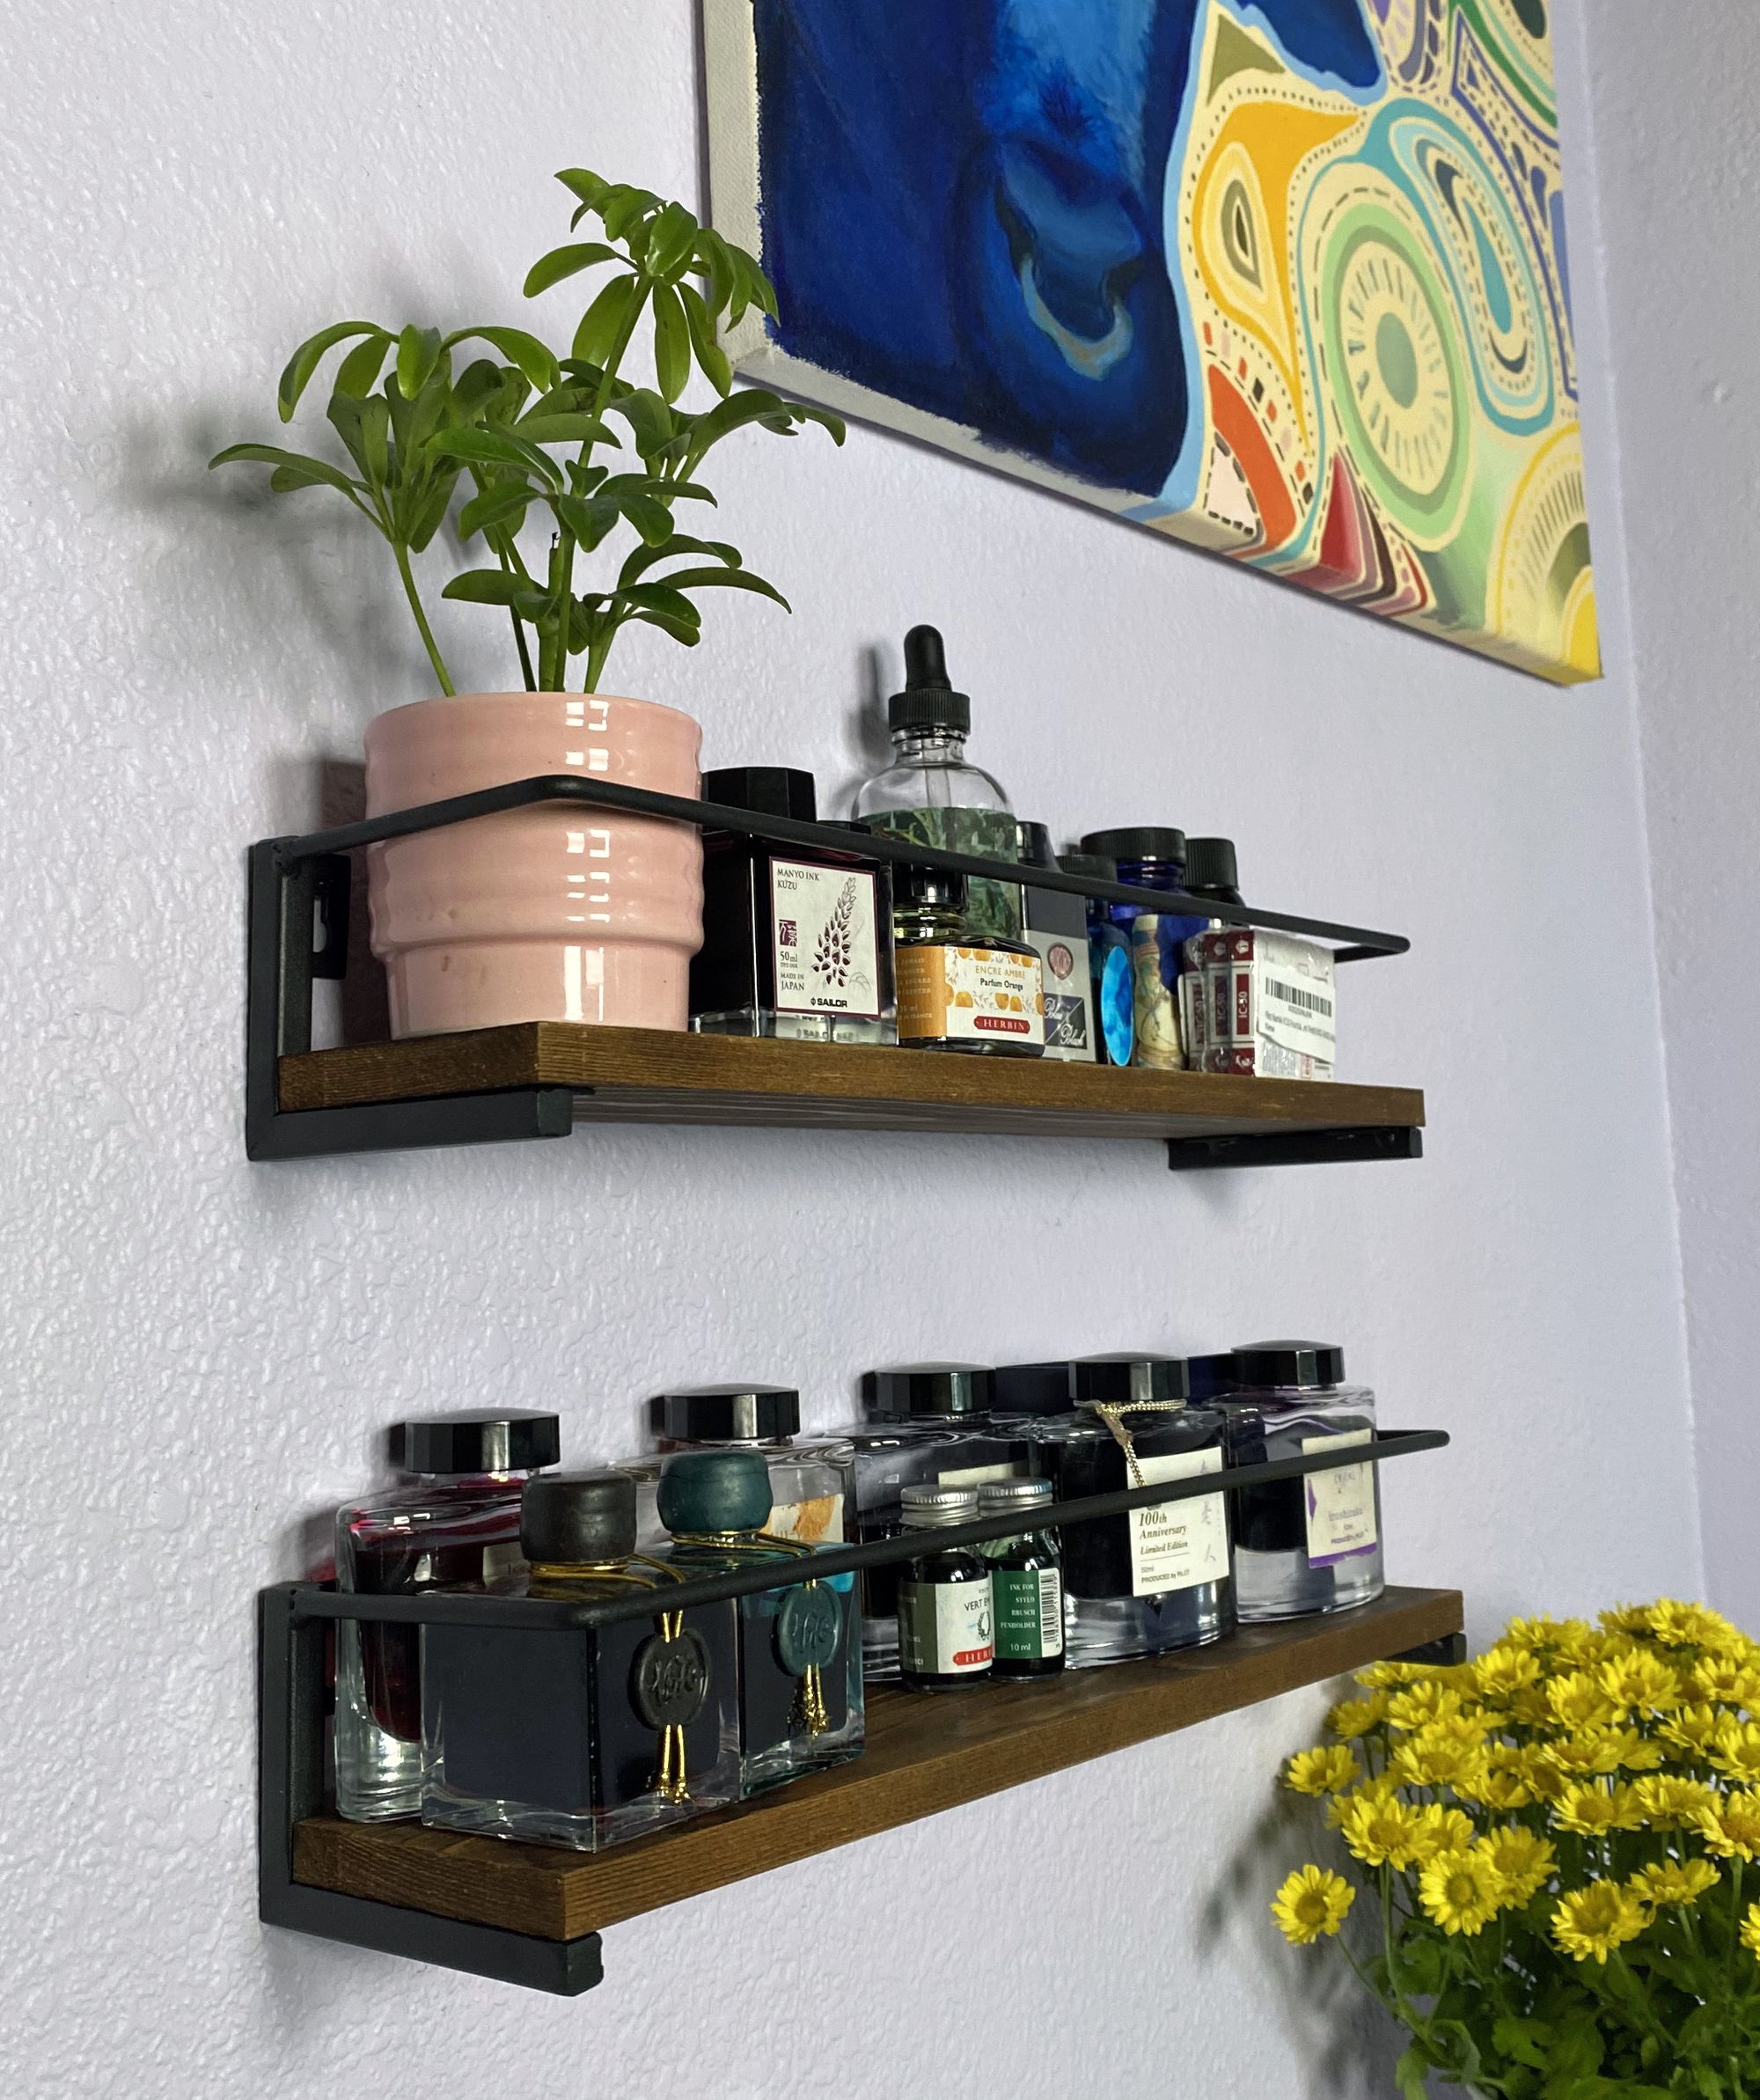 Using Spice Racks to Organize, Display, and Store Your Ink Bottles